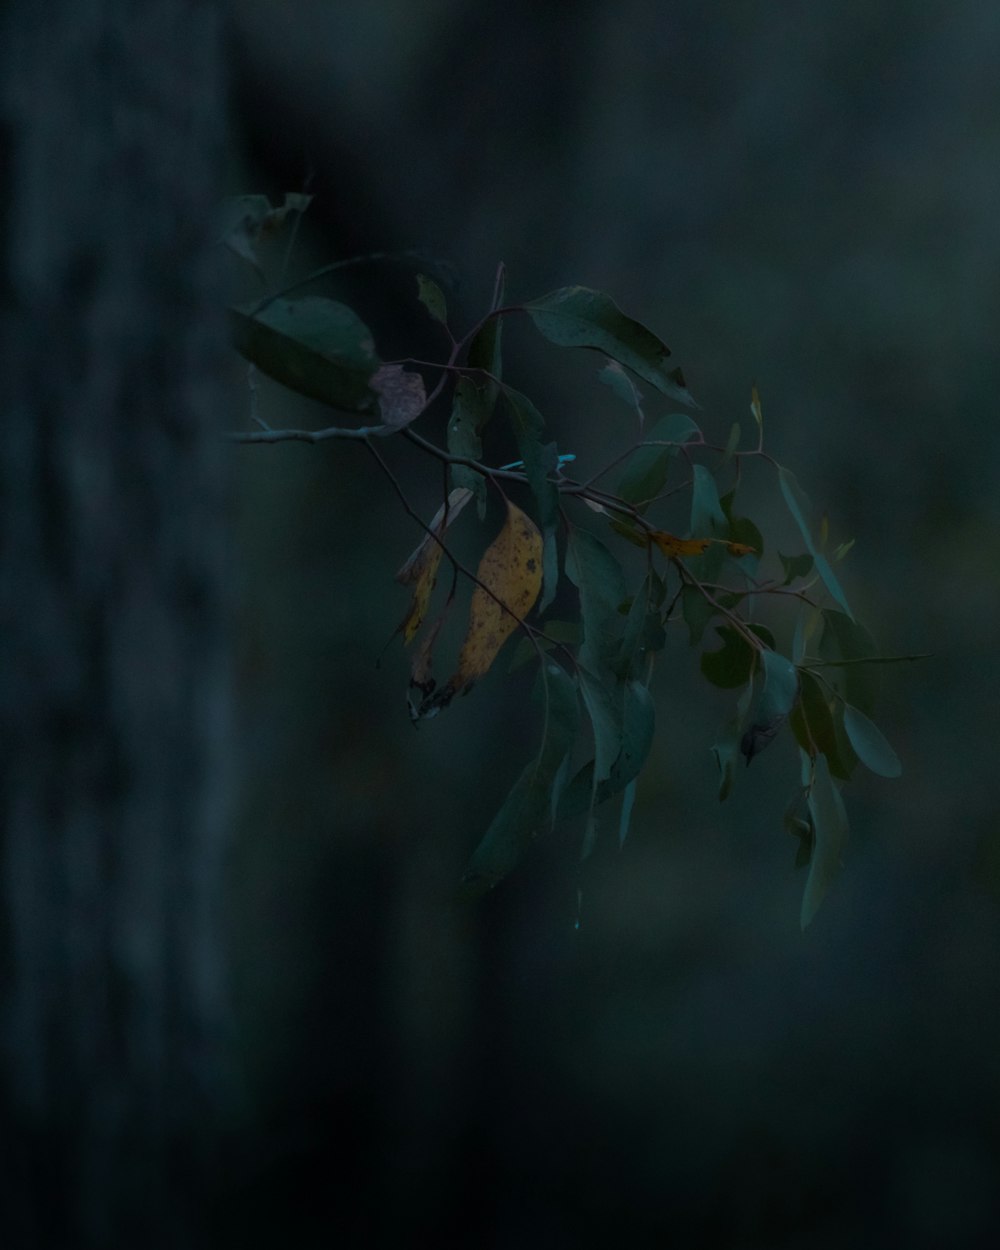 a branch of a tree with leaves in the dark